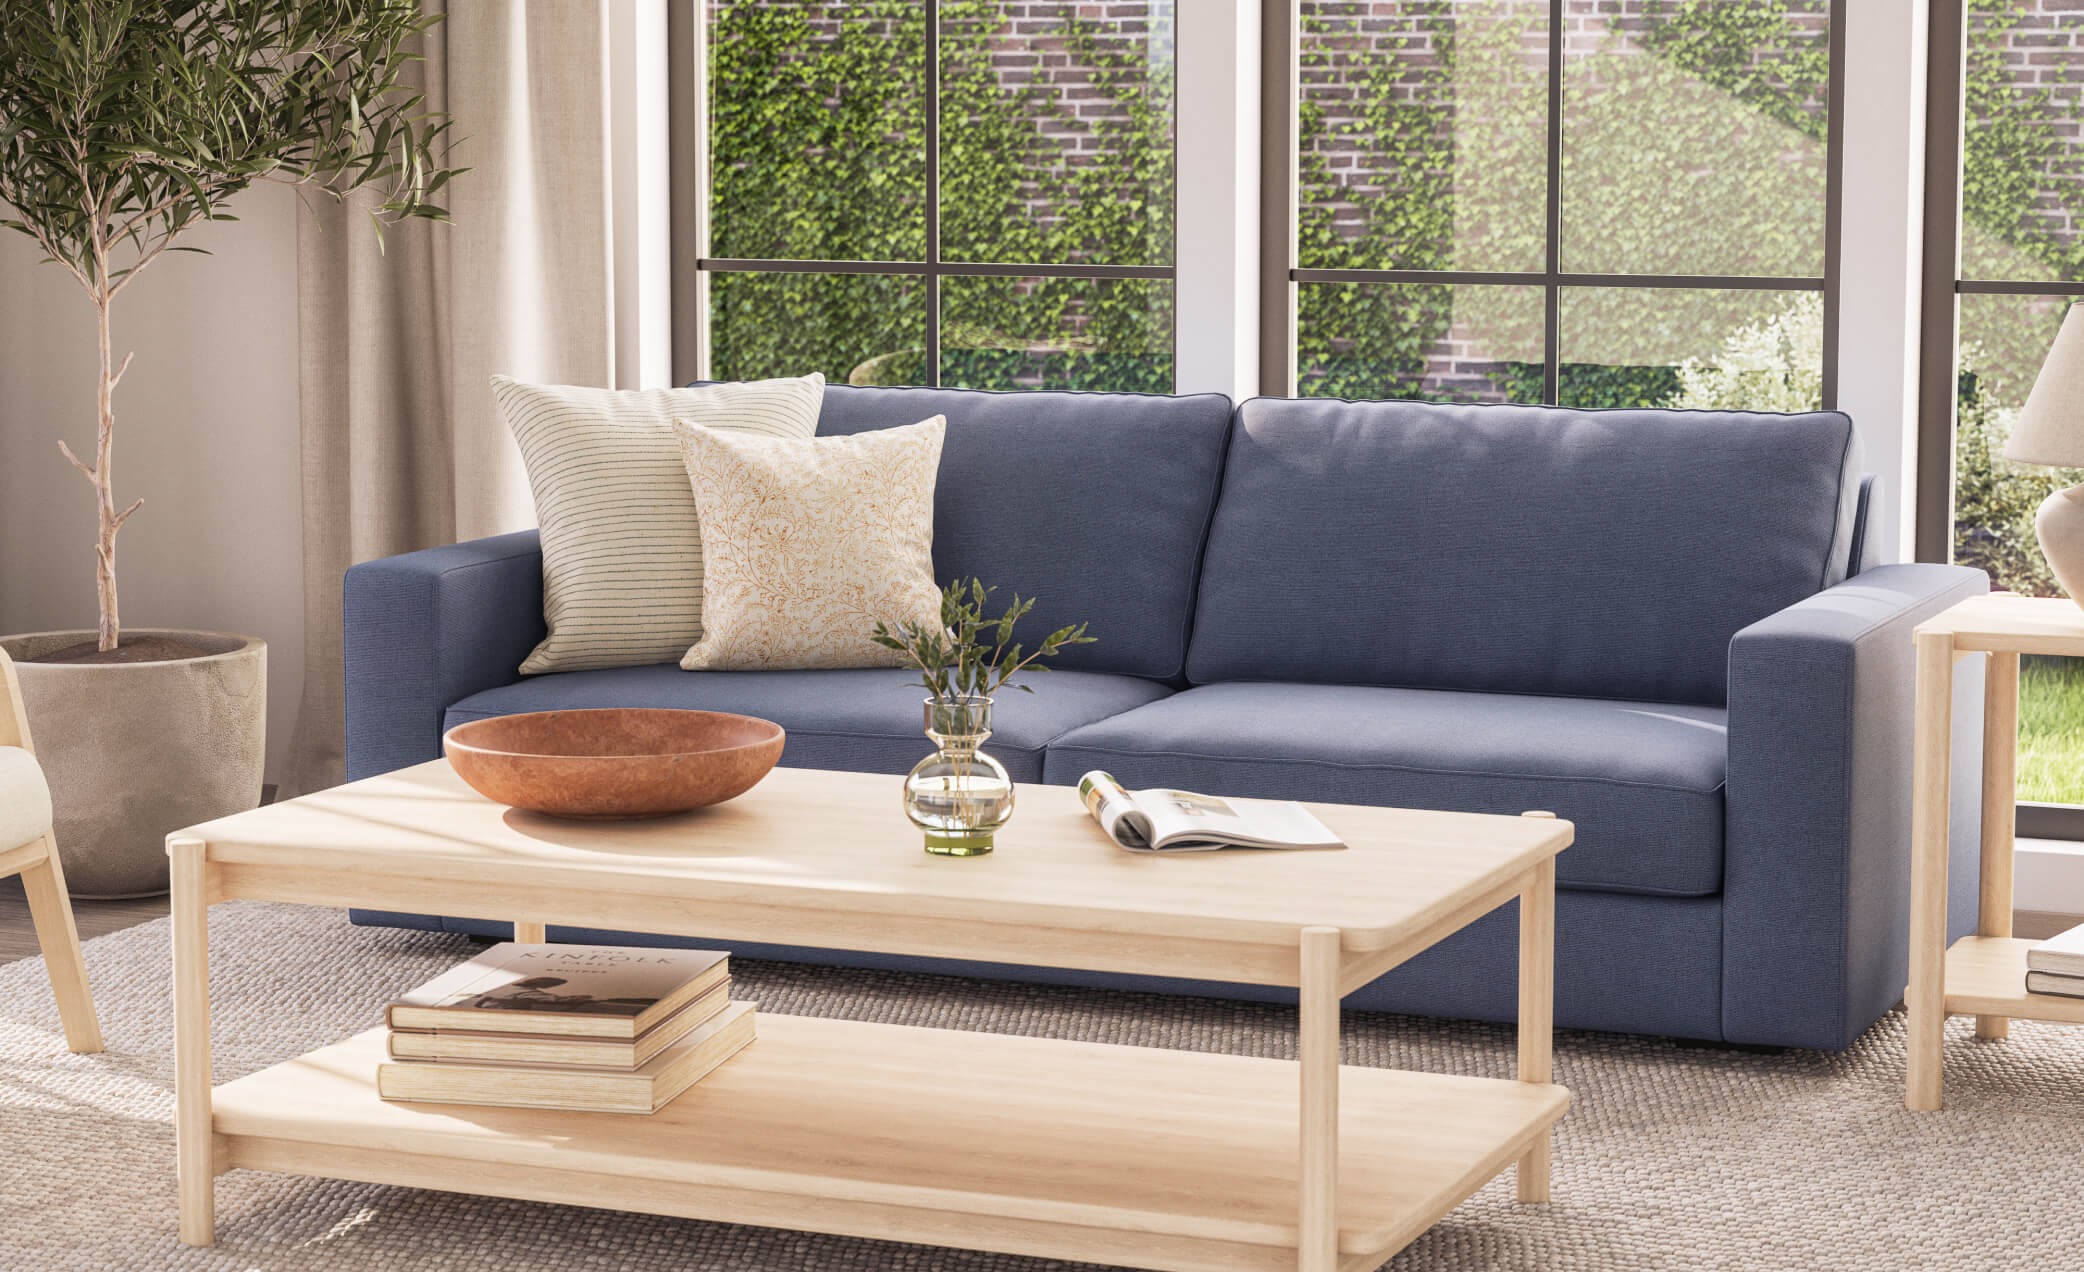 G: Iris Rectangular Coffee Table in Maple with Rio Sofa in Texture French Blue fabric